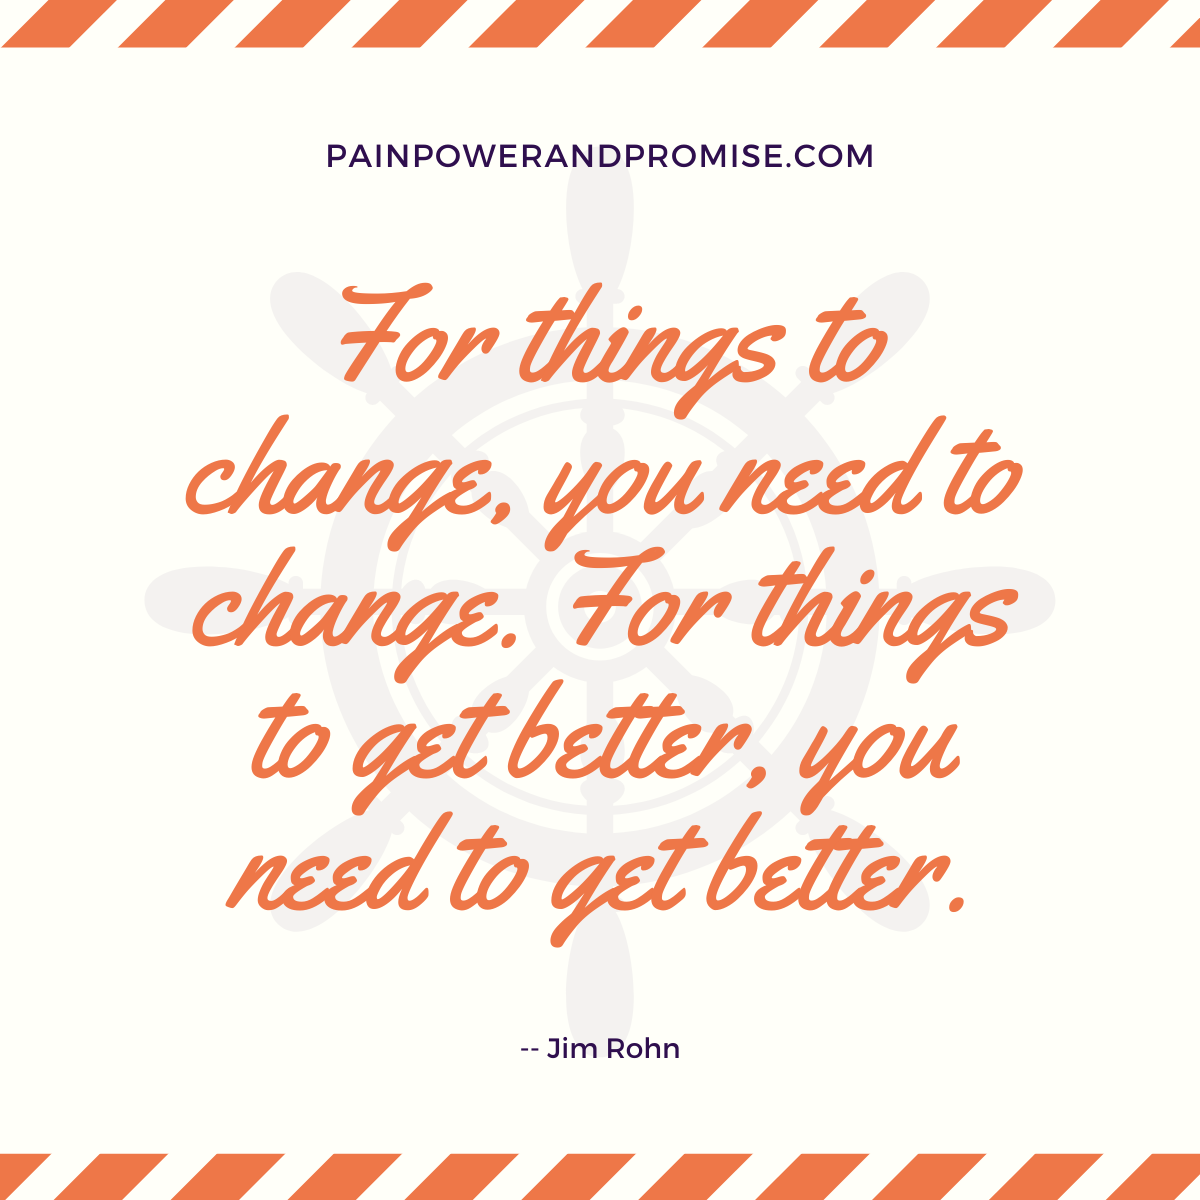 For things to change, you need to change. For things to get better, you need to get better.